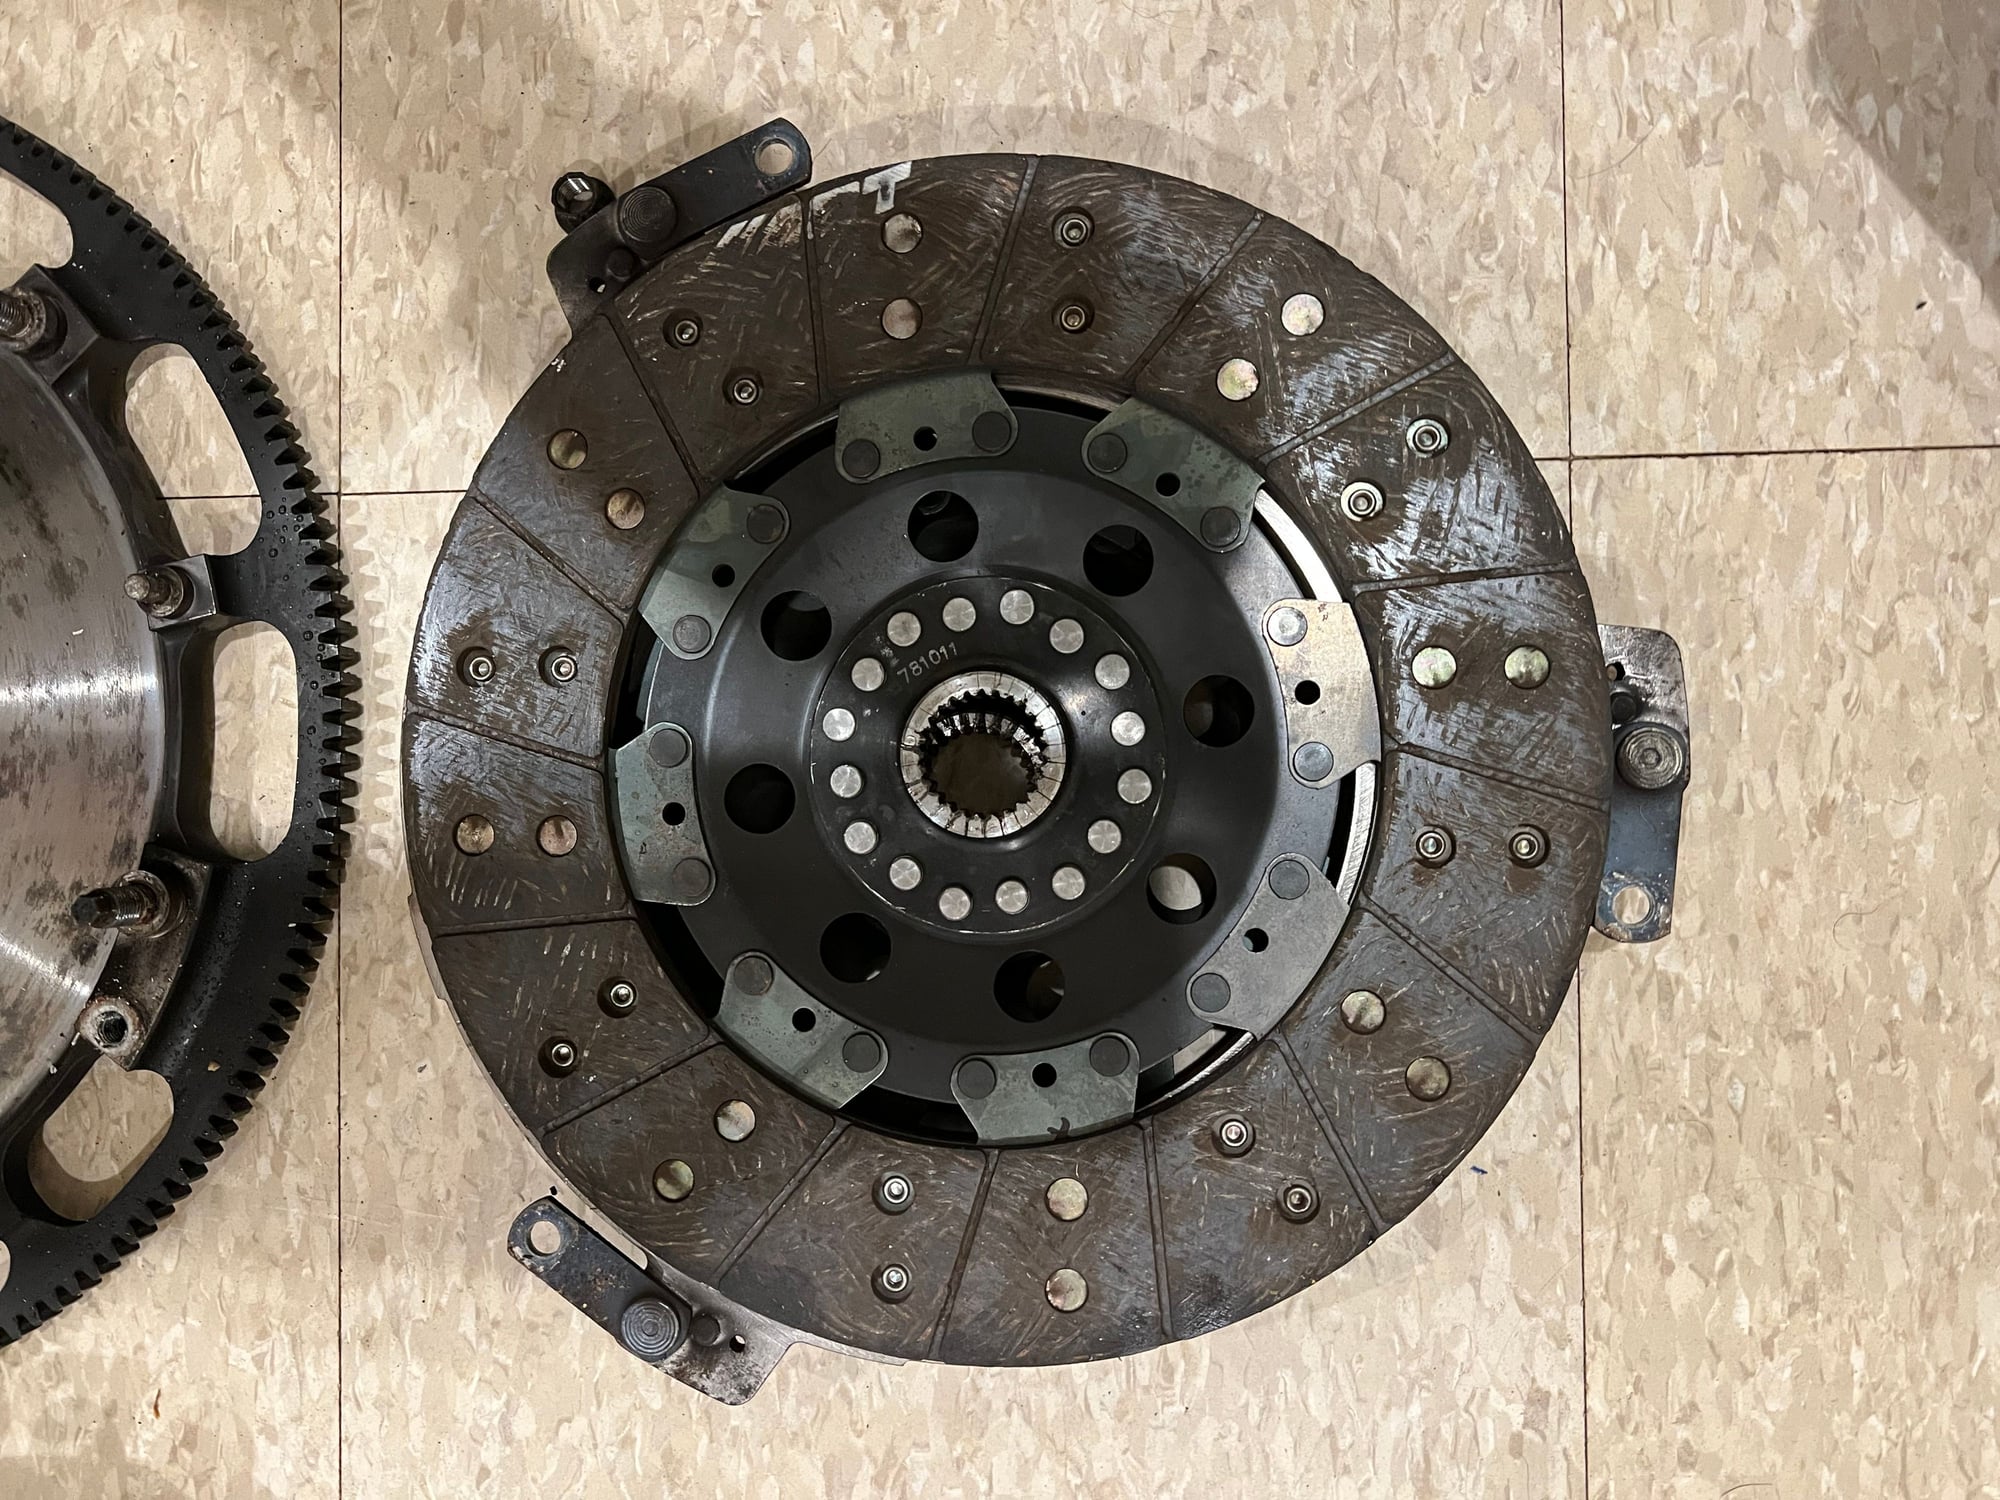 Drivetrain - ACT Extreme Twin Stage 1 Clutch w/ Flywheel (LS1/LS2/LS7) ARP Pro Flywheel Bolt Kit - Used - 0  All Models - Milford, CT 06461, United States